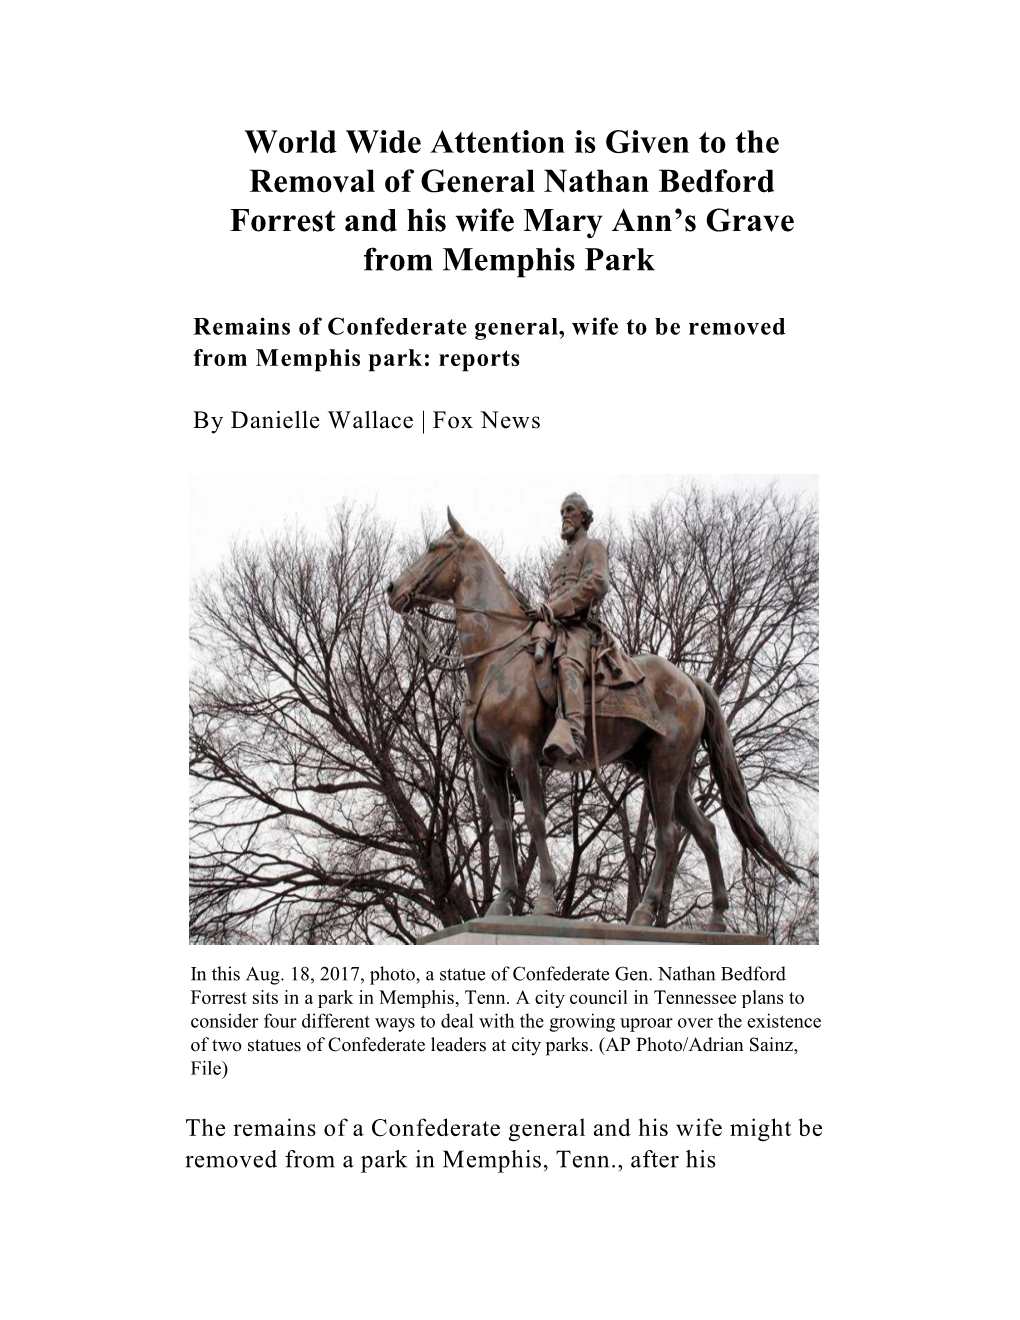 World Wide Attention Is Given to the Removal of General Nathan Bedford Forrest and His Wife Mary Ann’S Grave from Memphis Park